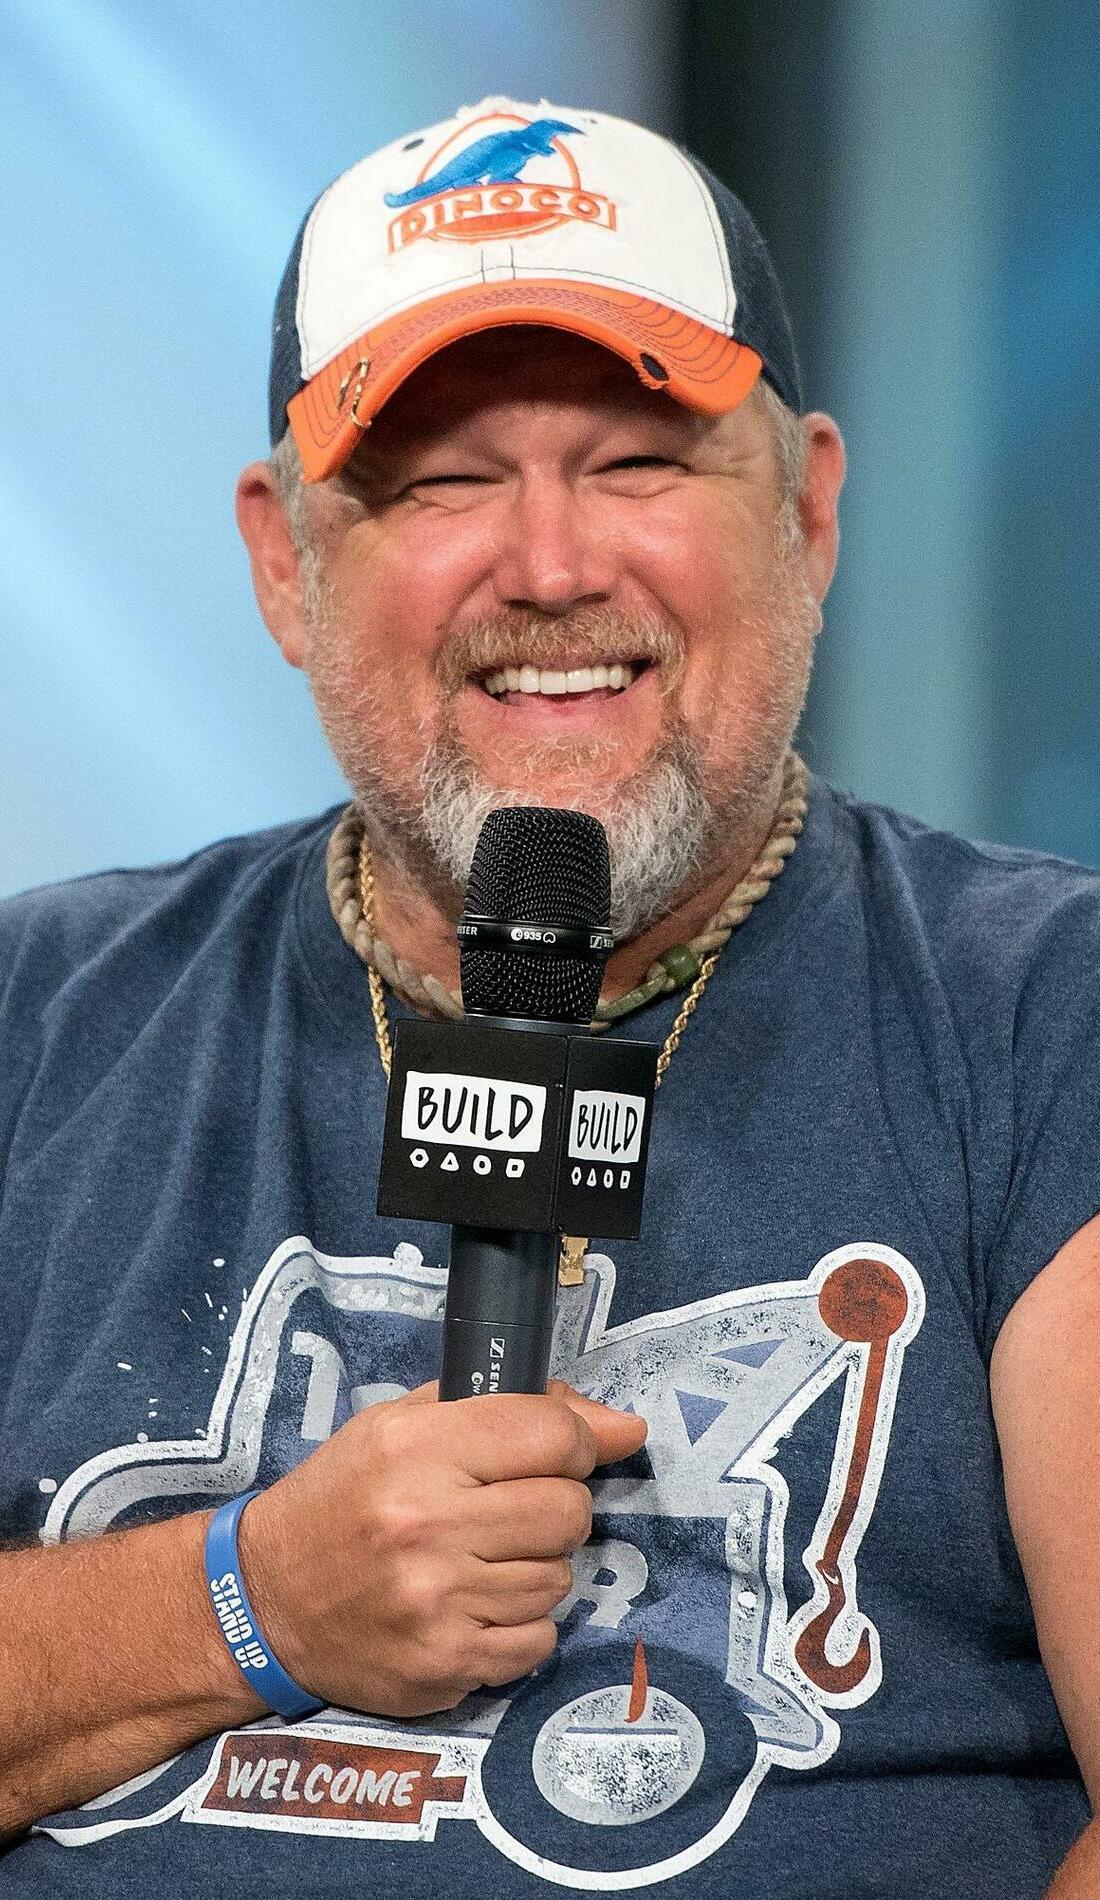 larry the cable guy